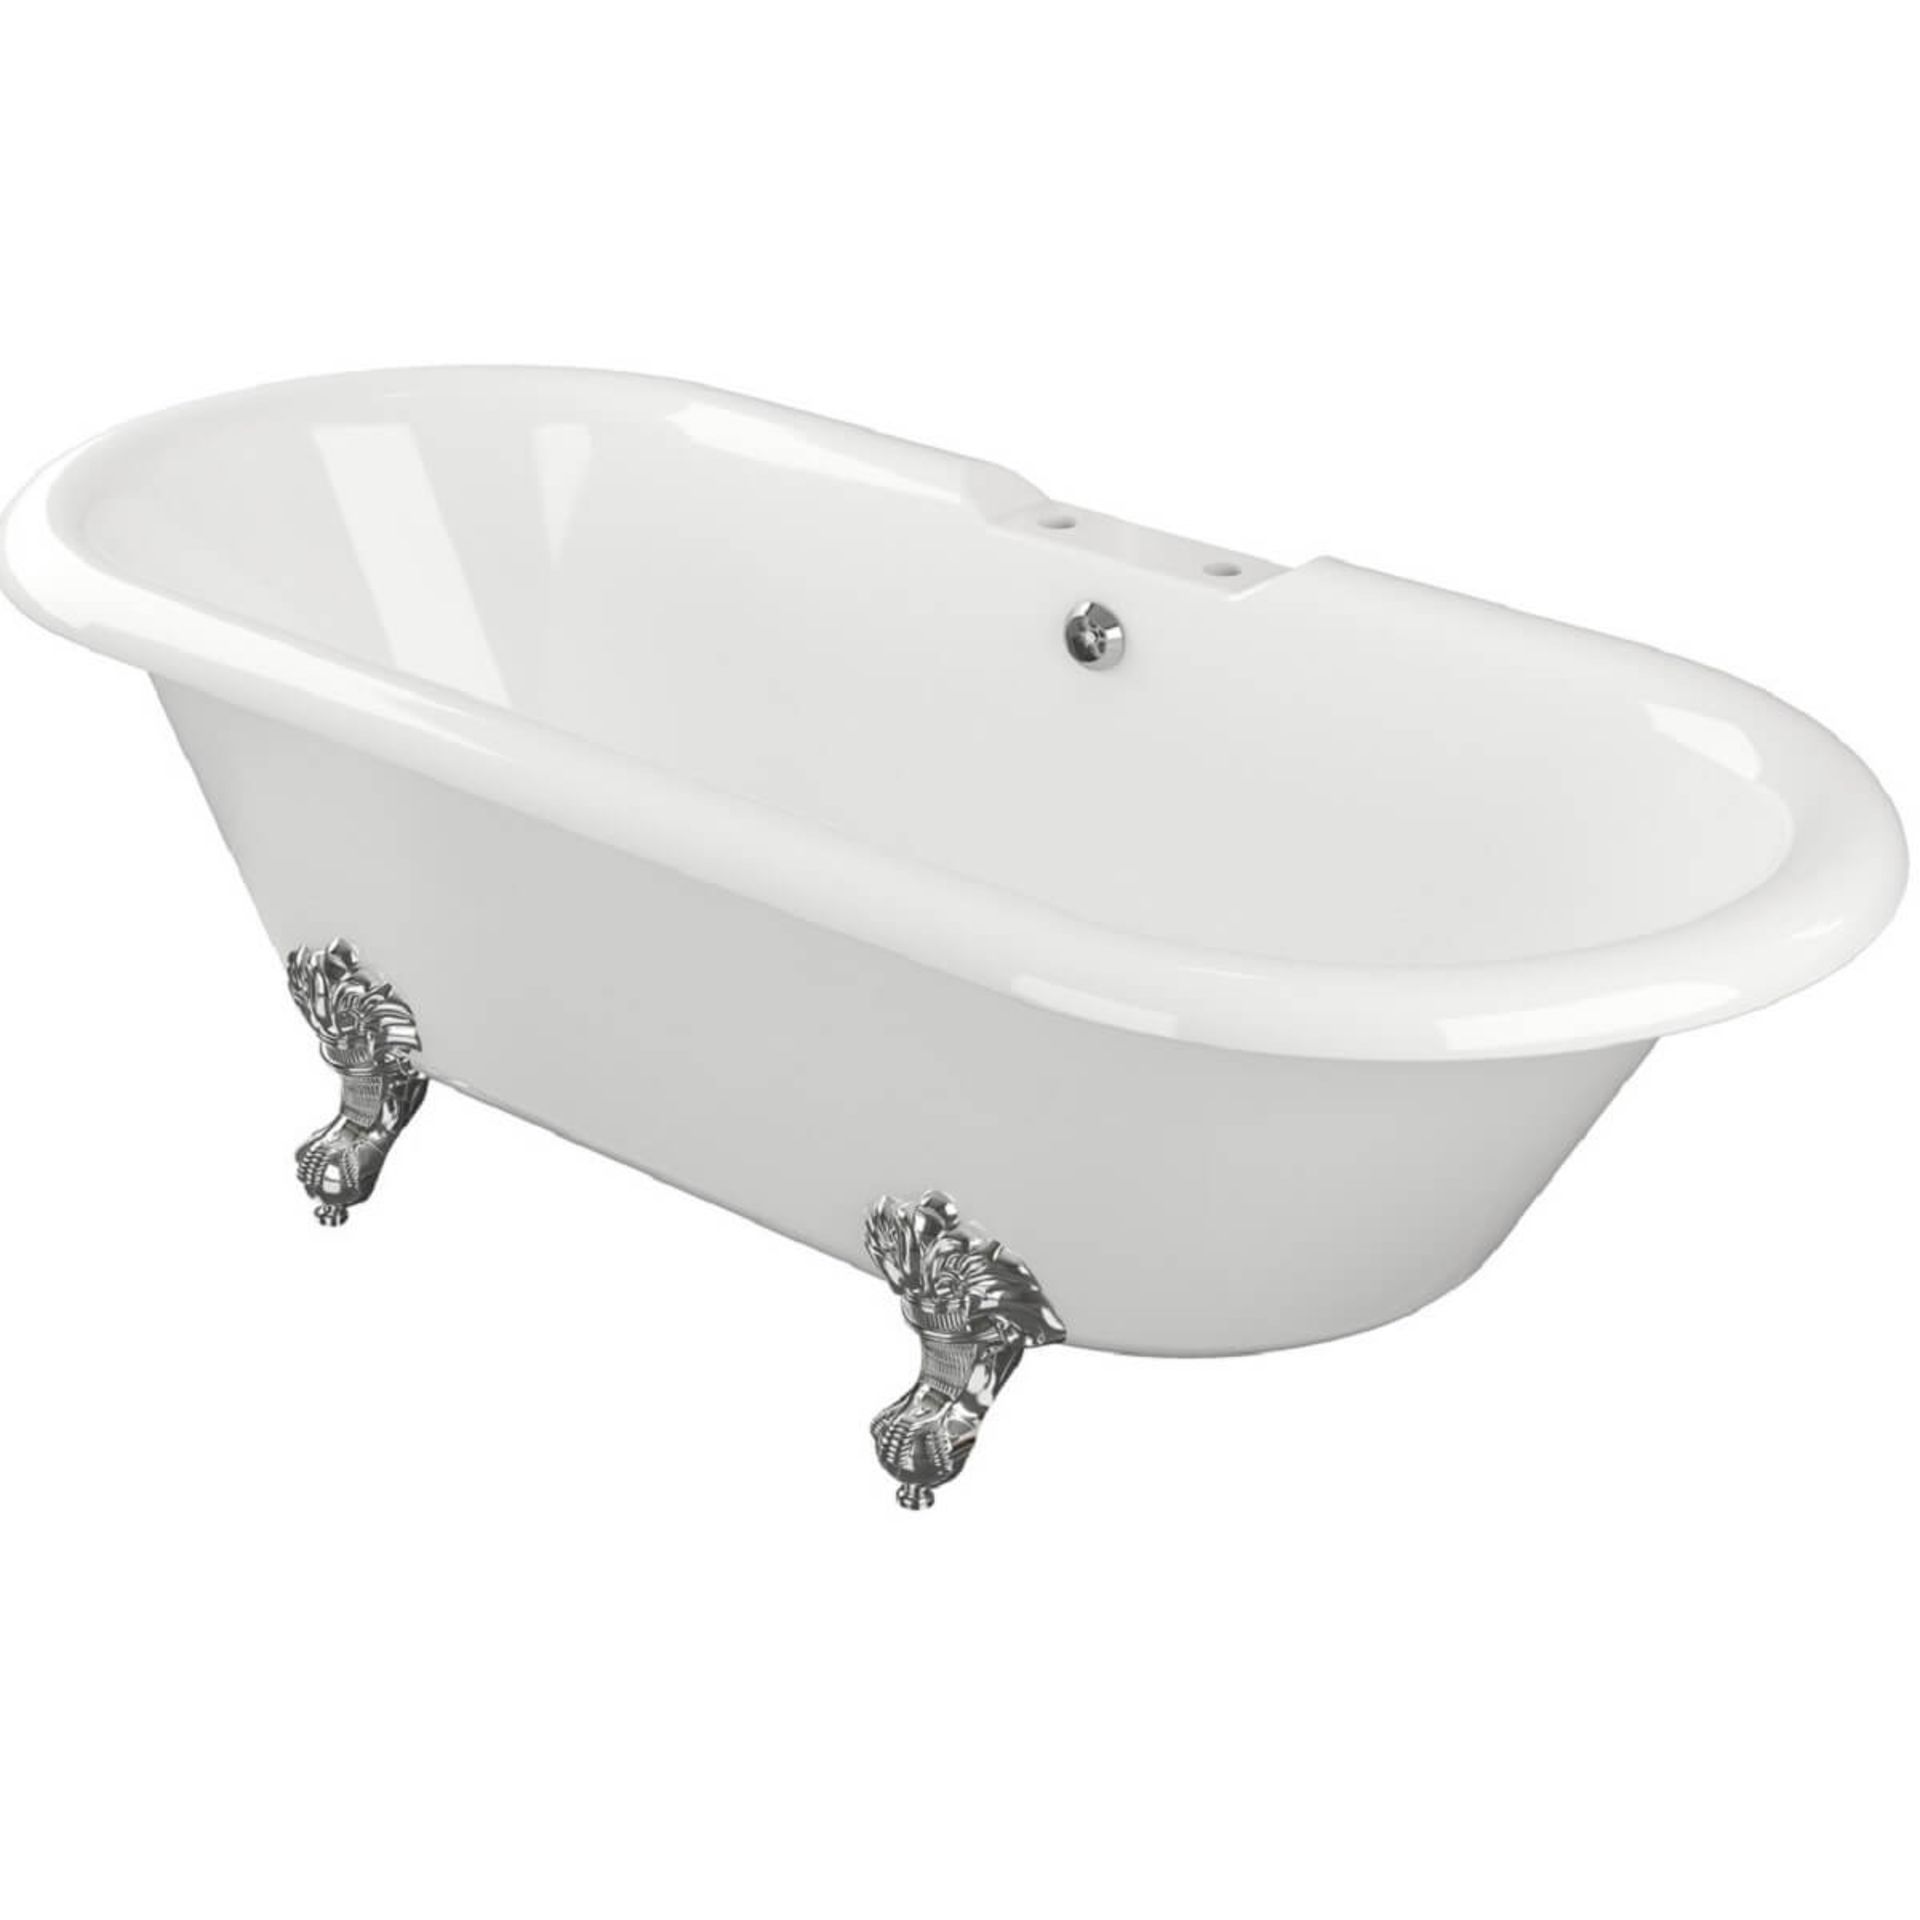 New 1690X740X620mm Richmond White Roller Top Freestanding Bath With Chrome Ball Feet. A Double... - Image 2 of 2